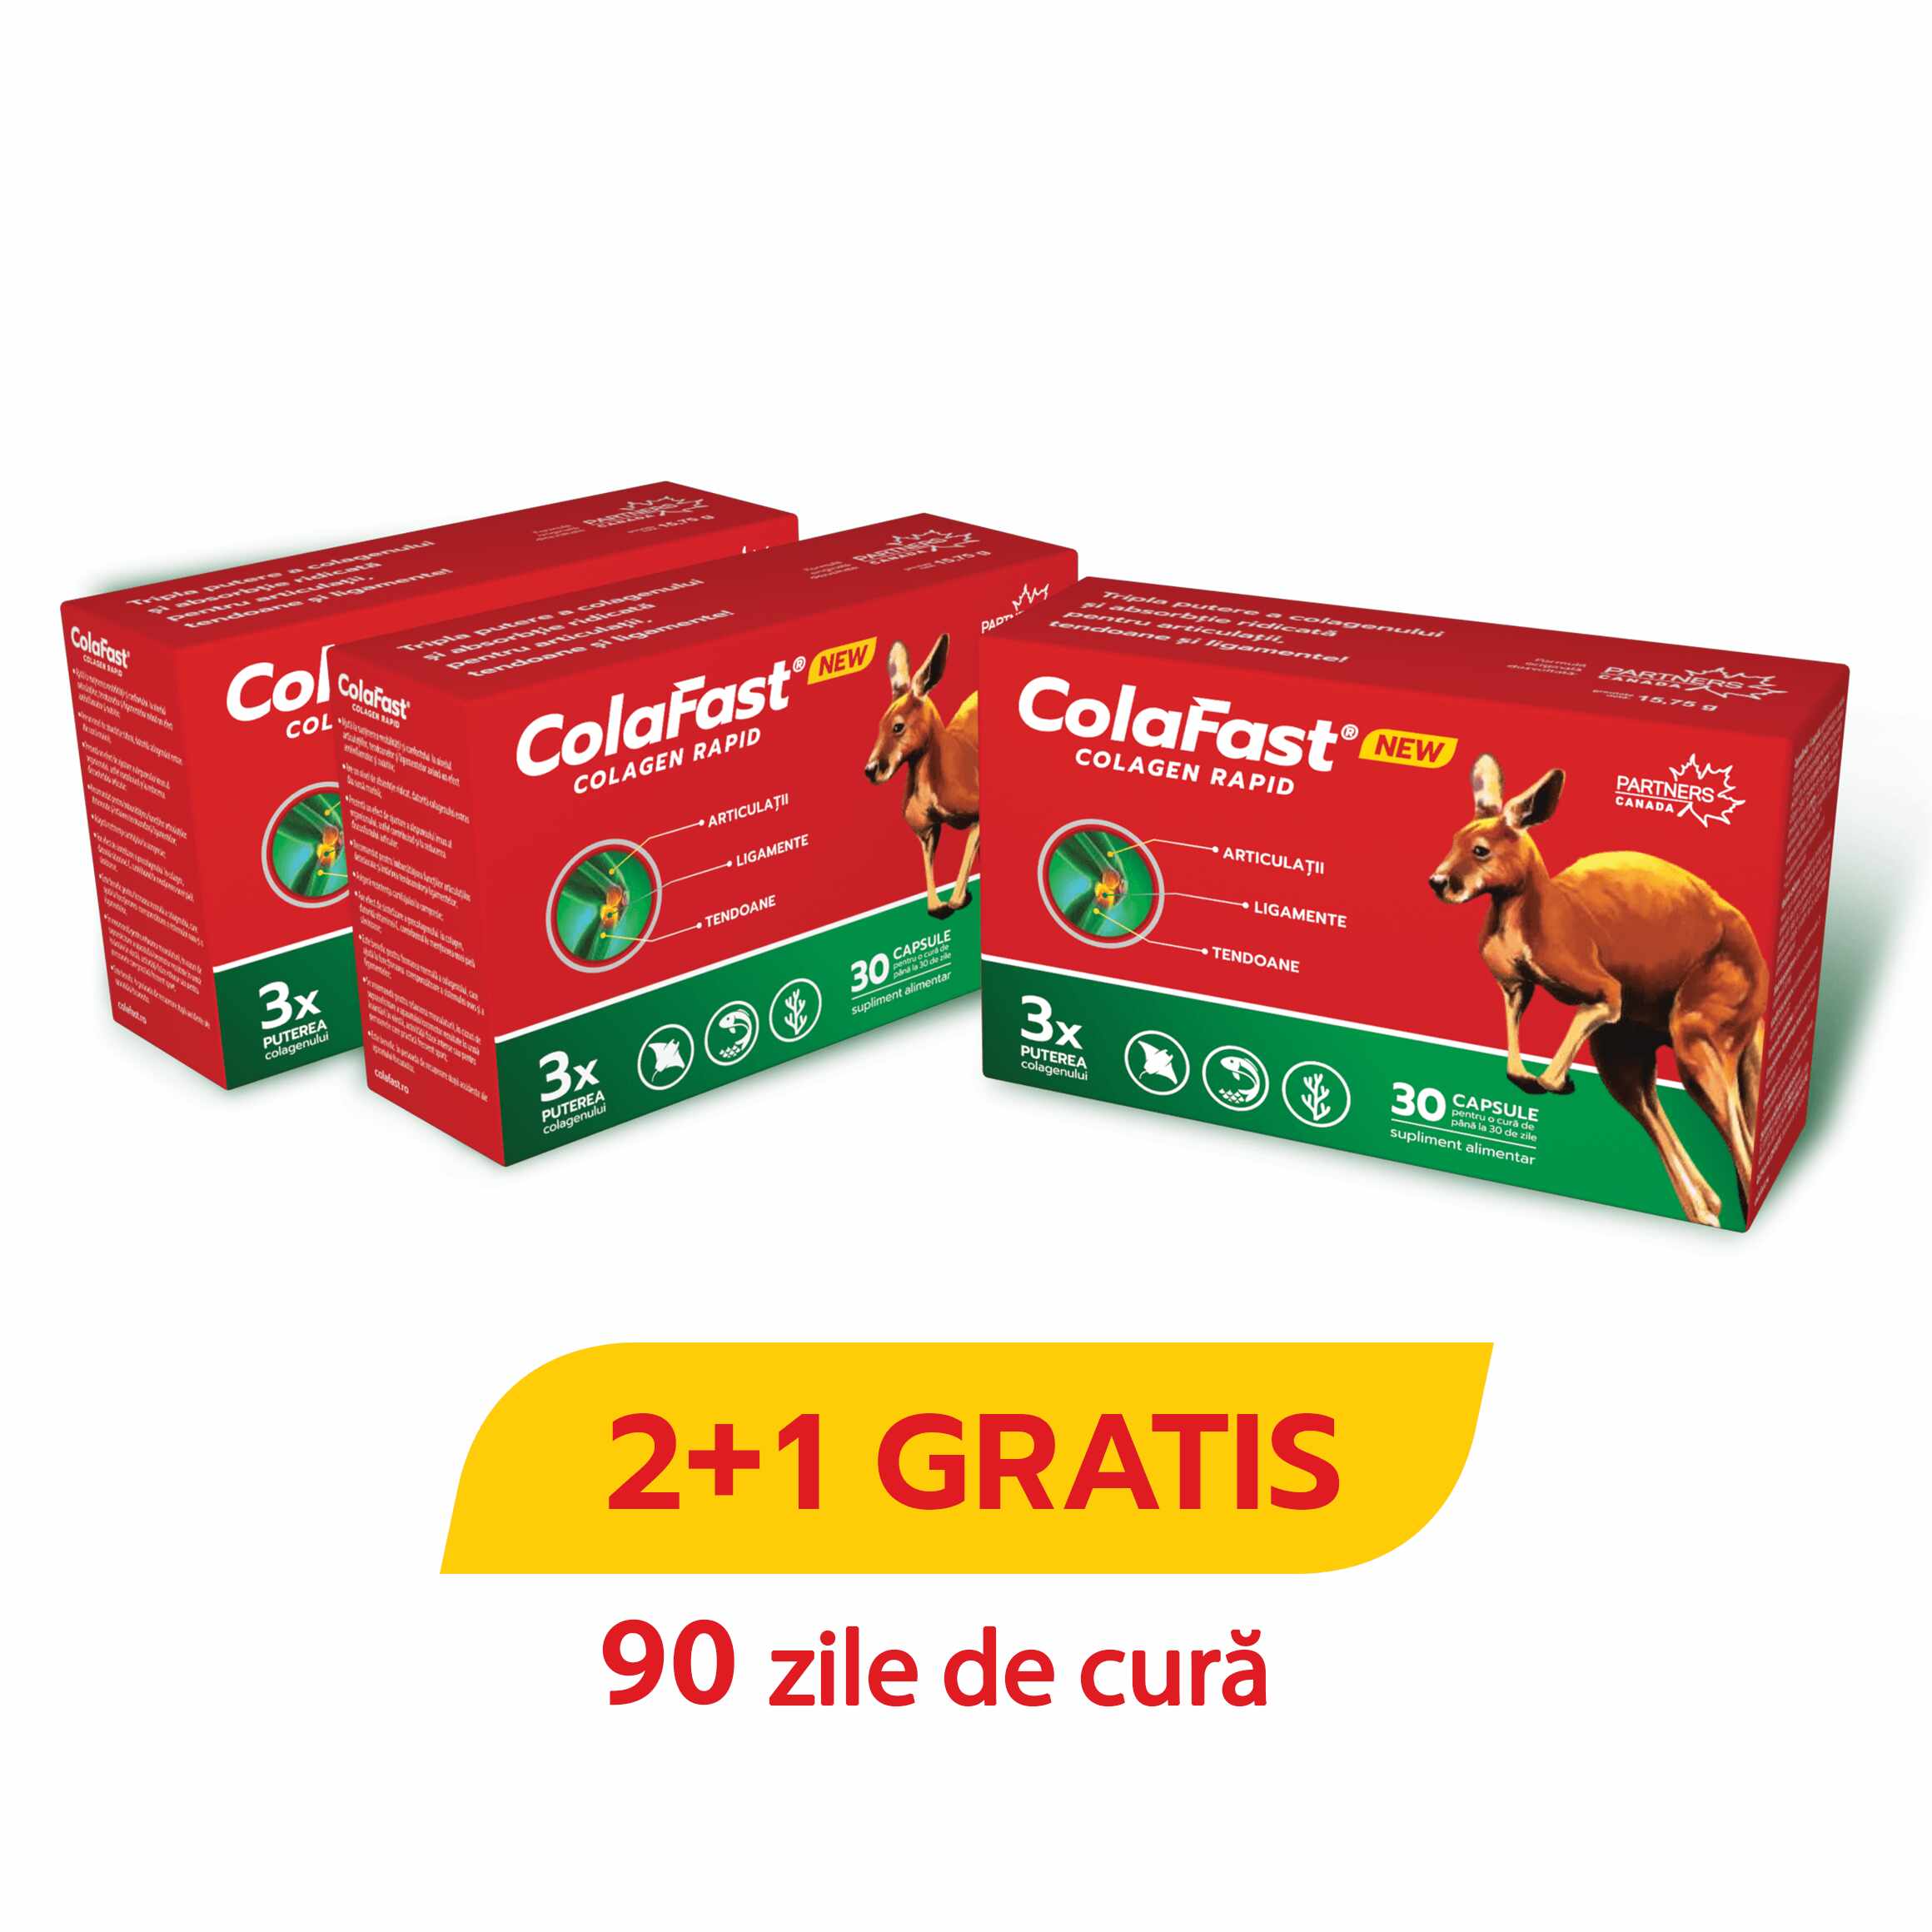 ColaFast Colagen Rapid 30cps - 2+1 GRATIS Good Days Therapy